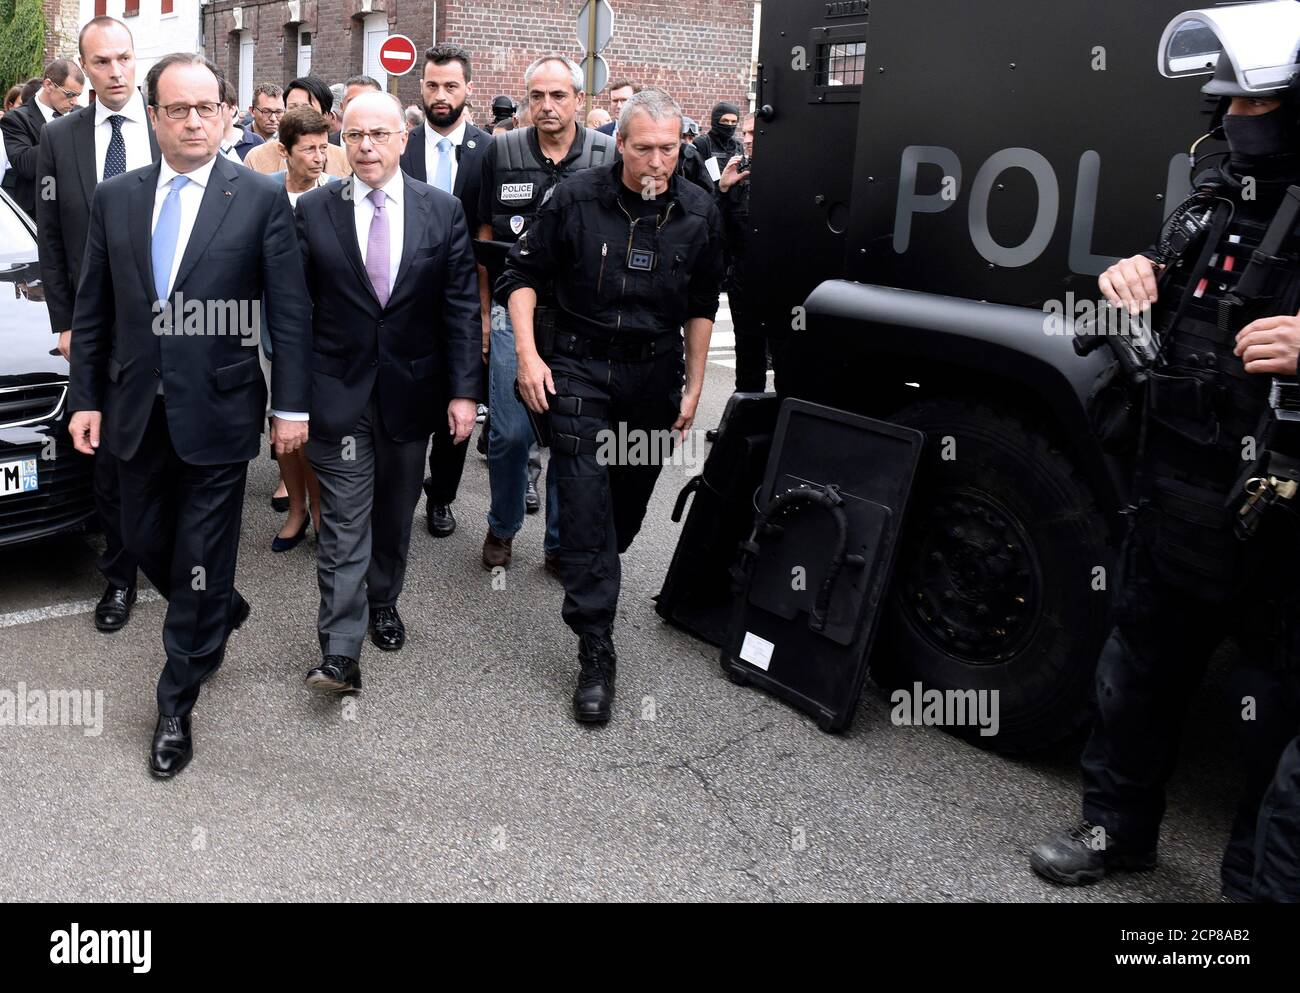 French President Francois Hollande (L), Interior Minister Bernard Cazeneuve (2ndL) and the Head of the French national police intervention group (RAID) Jean-Michel Fauvergue (R), arrive after a hostage-taking at a church in Saint-Etienne-du-Rouvray, France, July 26, 2016. A priest was killed with a knife and another hostage seriously wounded in an attack on a church that was carried out by assailants linked to Islamic State.    REUTERS/Boris Maslard/Pool Stock Photo